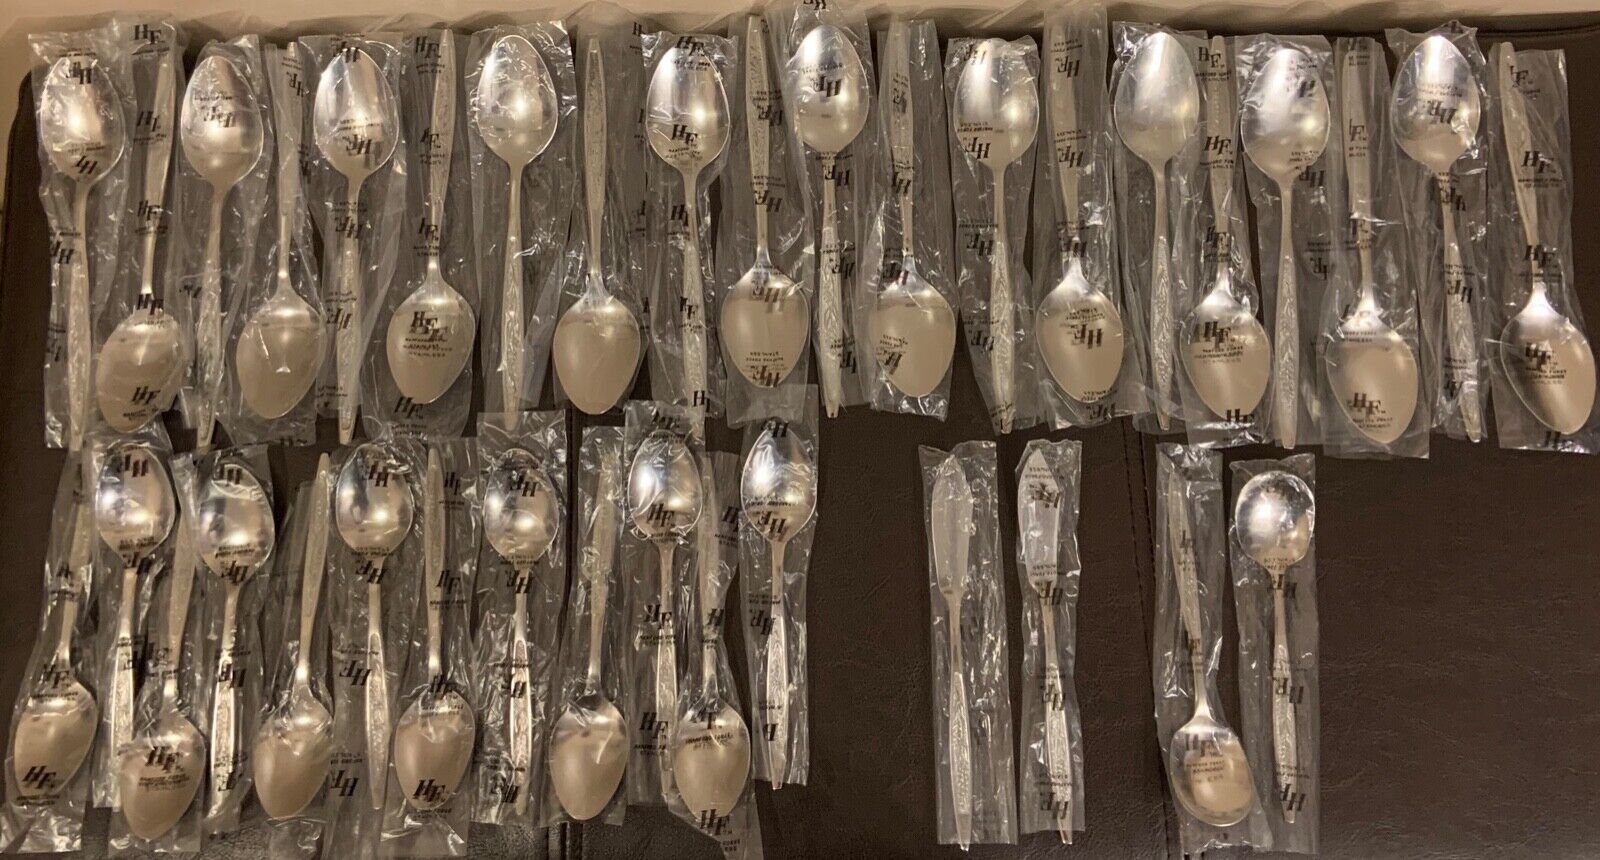 Hanford Forge Provincial Wheat Stainless Tableware 36pc Silverware New In Bags